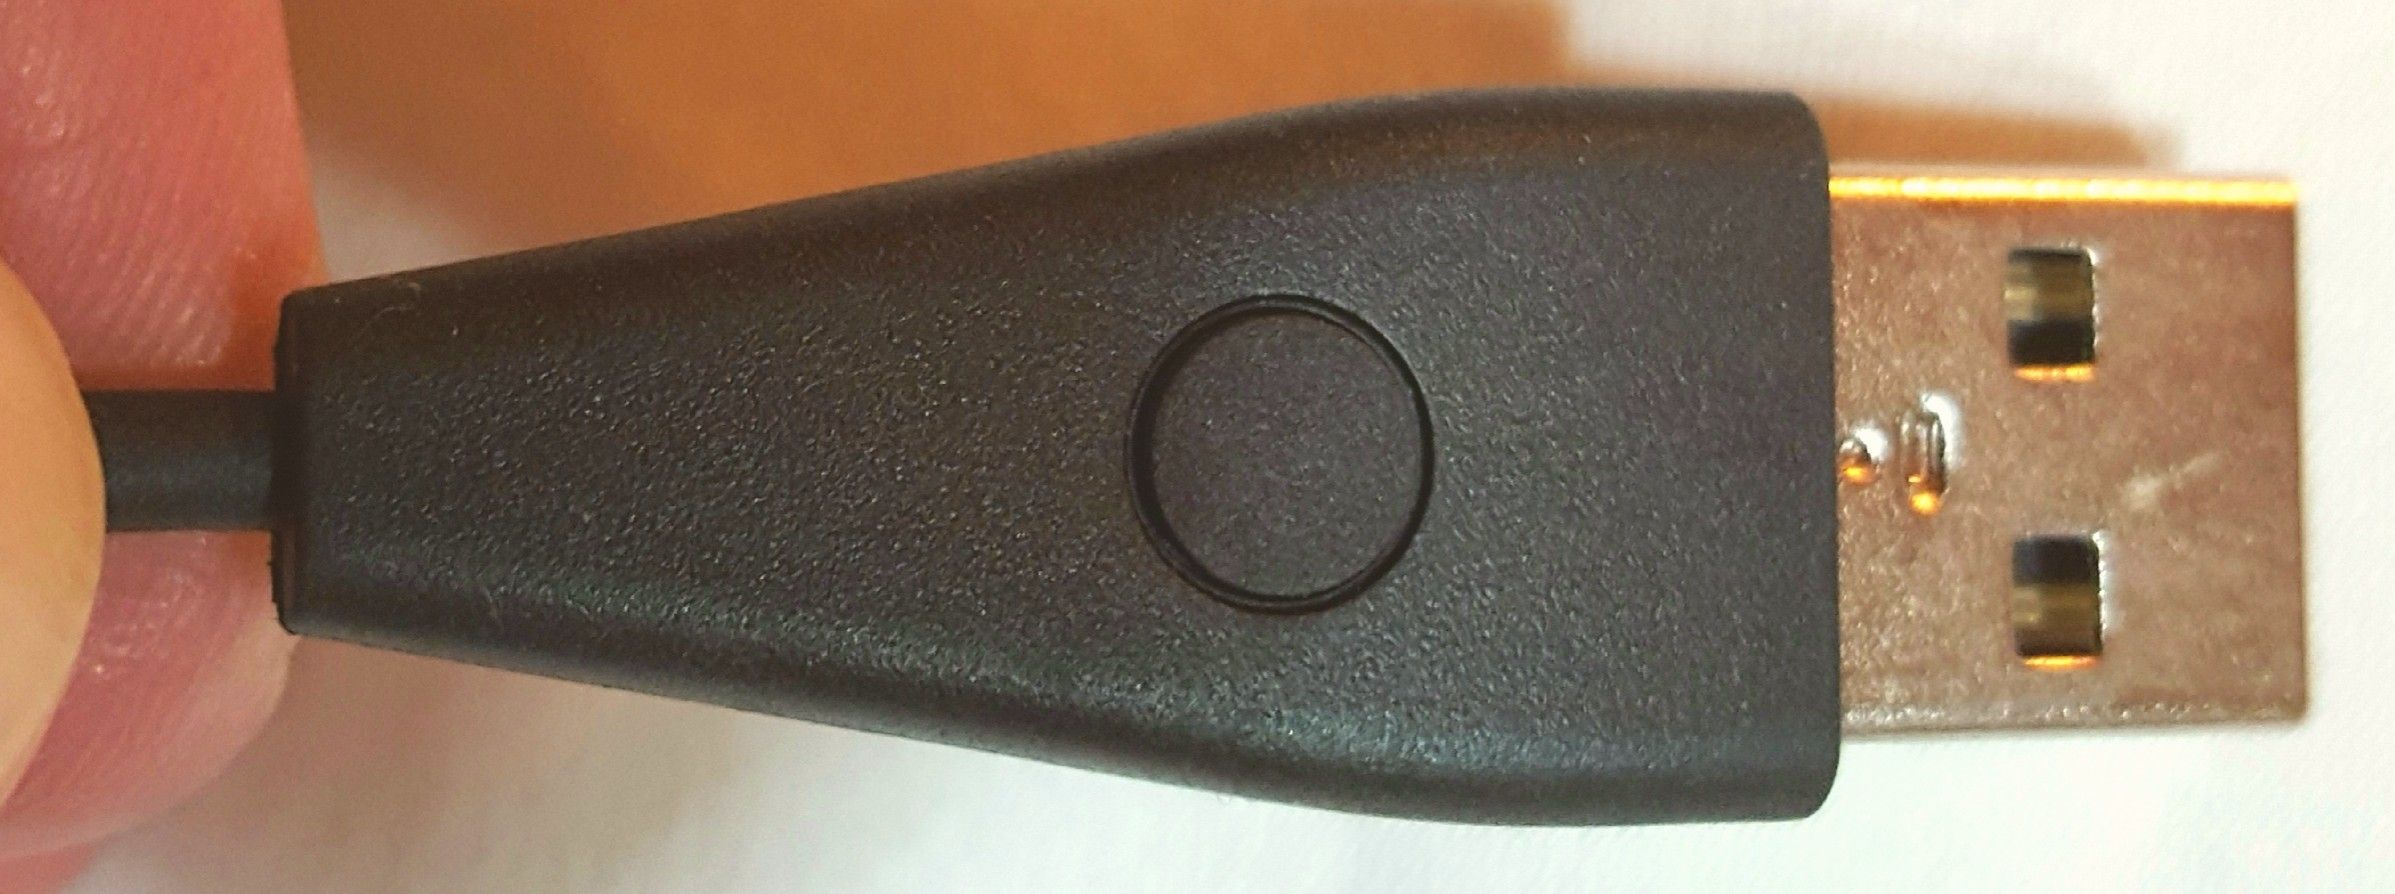 button on fitbit charger